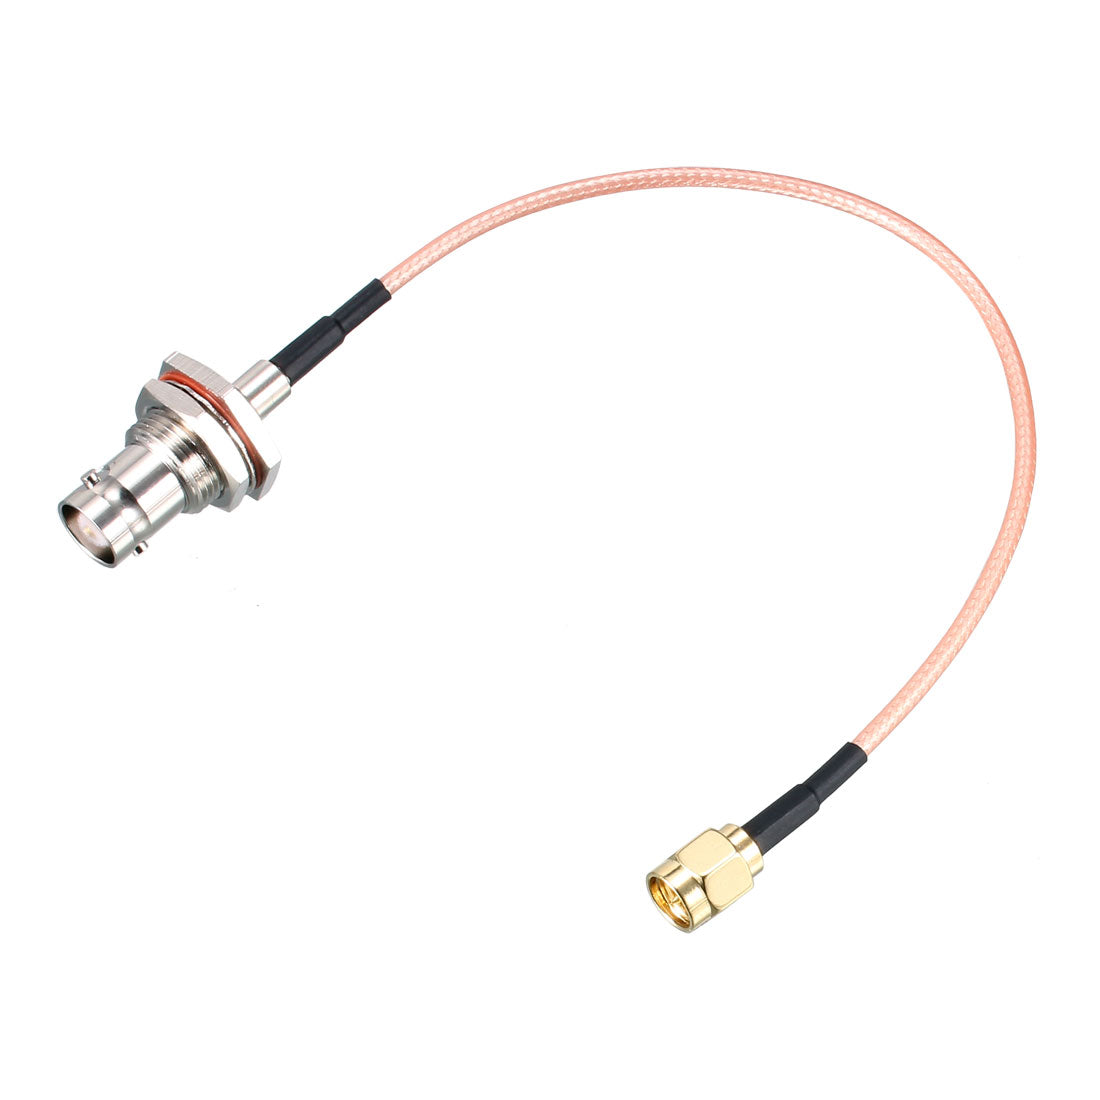 Uxcell Uxcell SMA Male to BNC Female Bulkhead RF Coaxial Cable RG316 Coax Cable 12 Inches